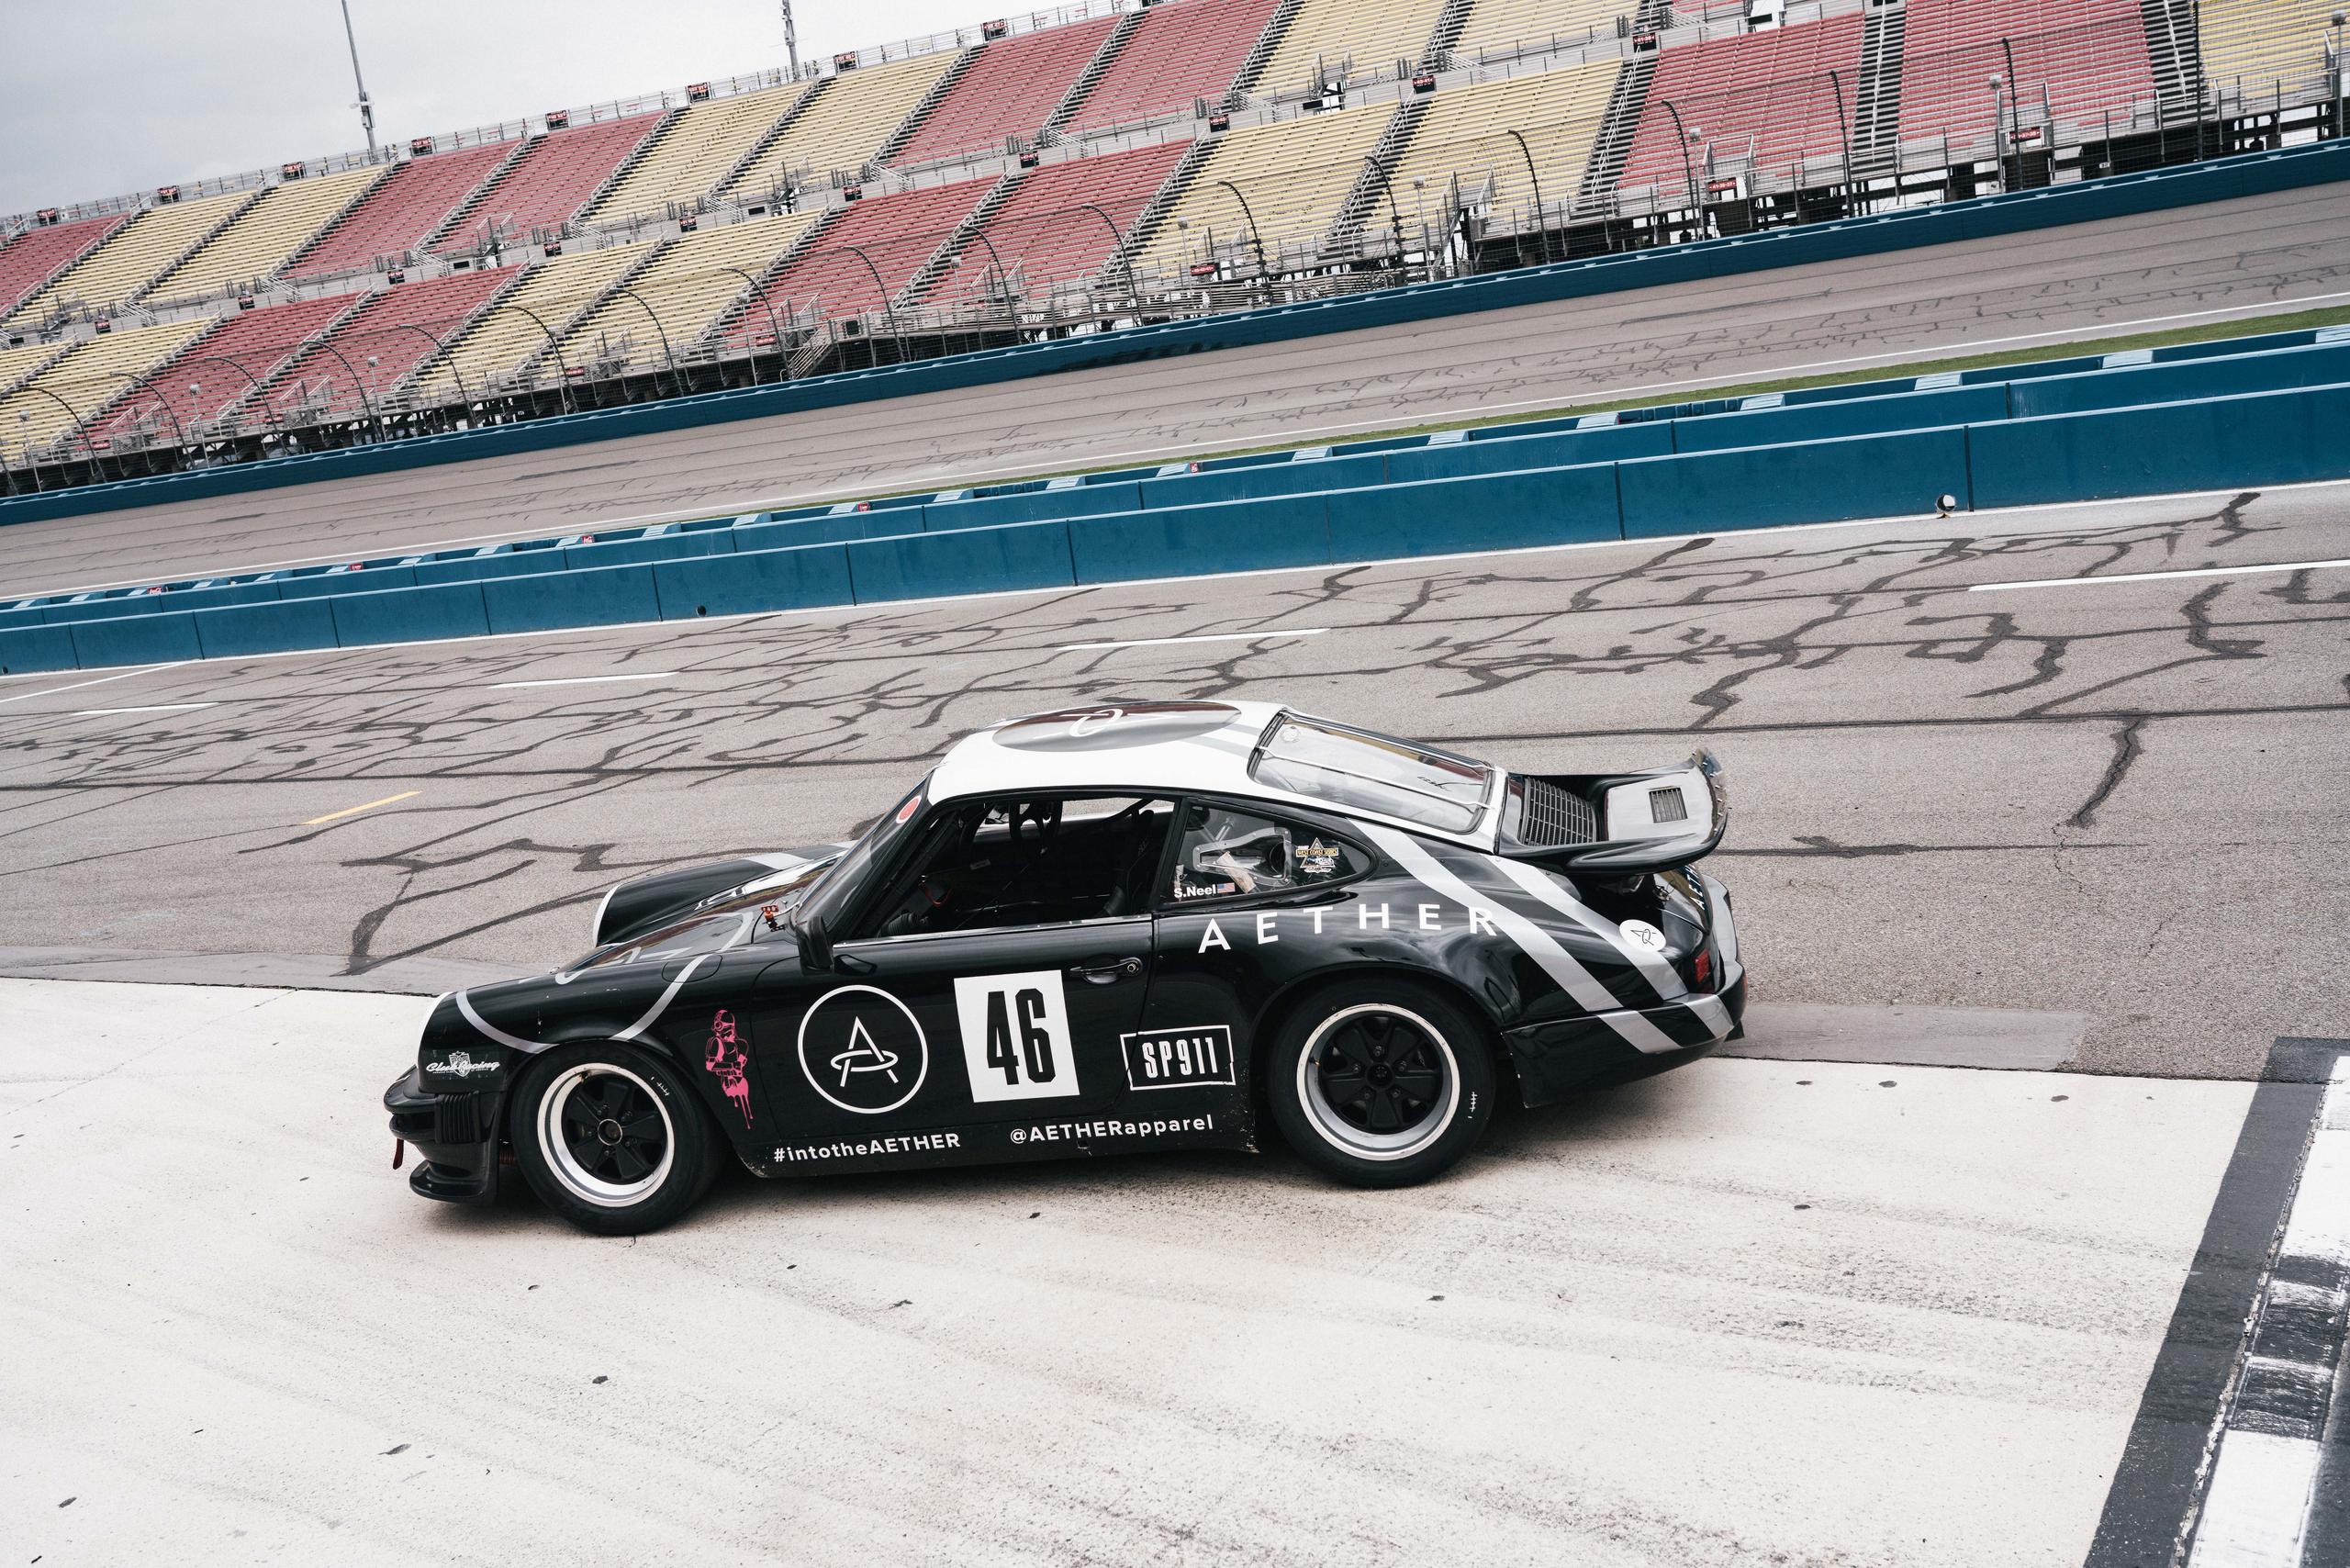 Aether branded Porsche car on race track